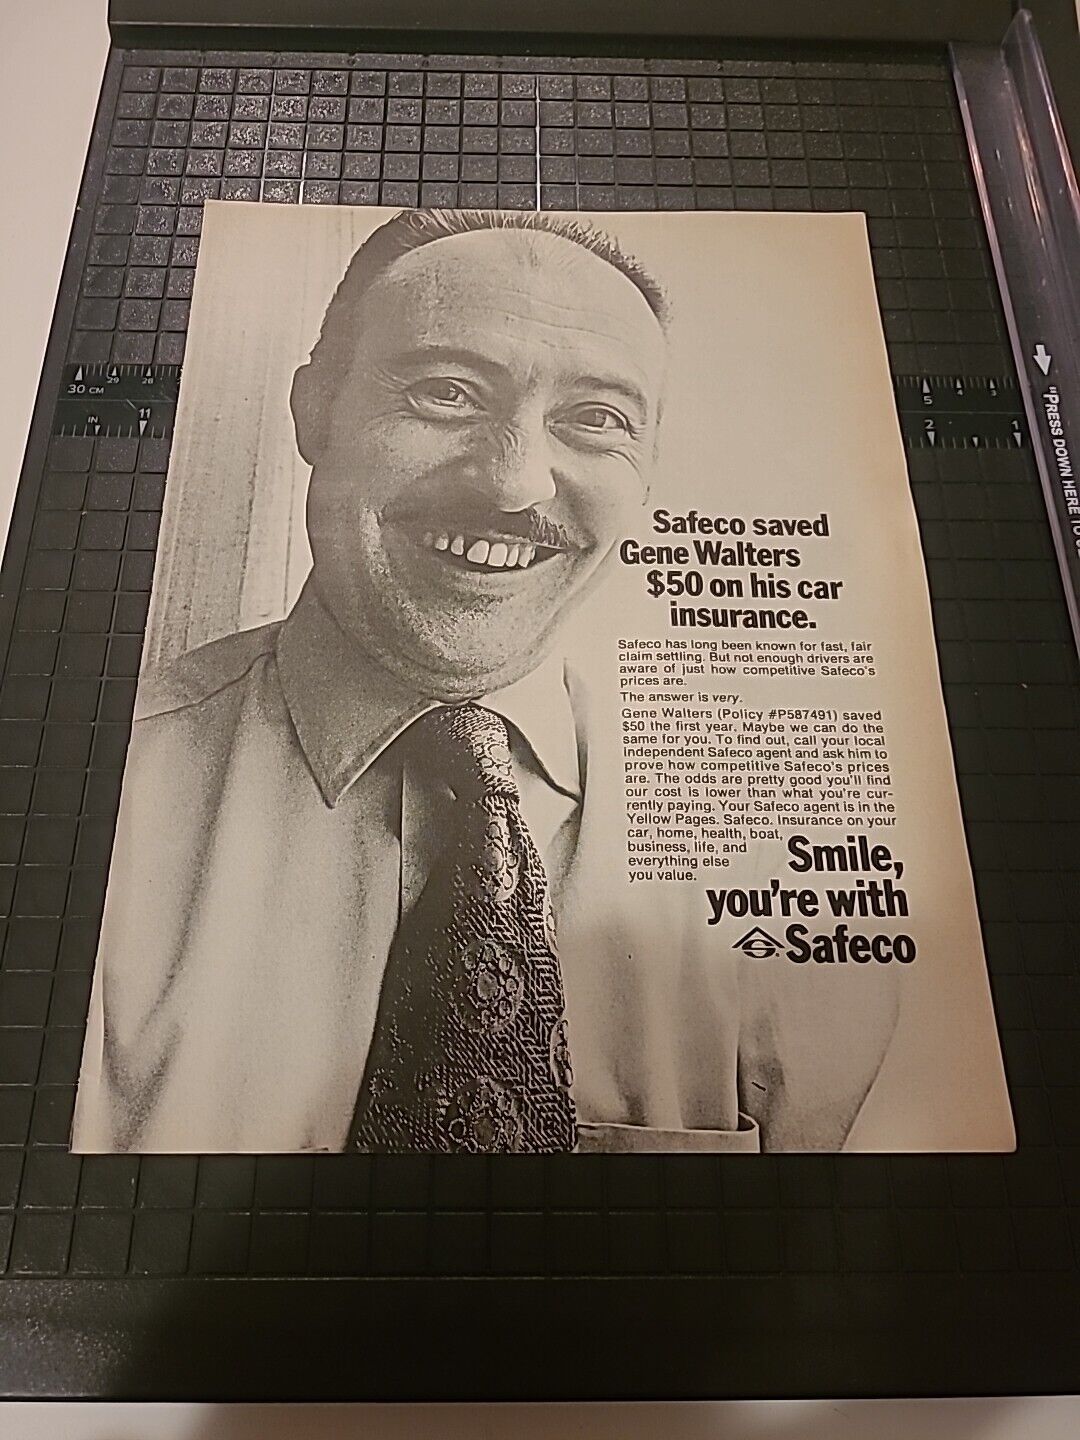 Safeco Car Insurance Smile Vintage  Print Ad 1973  8x11  Great To Frame 